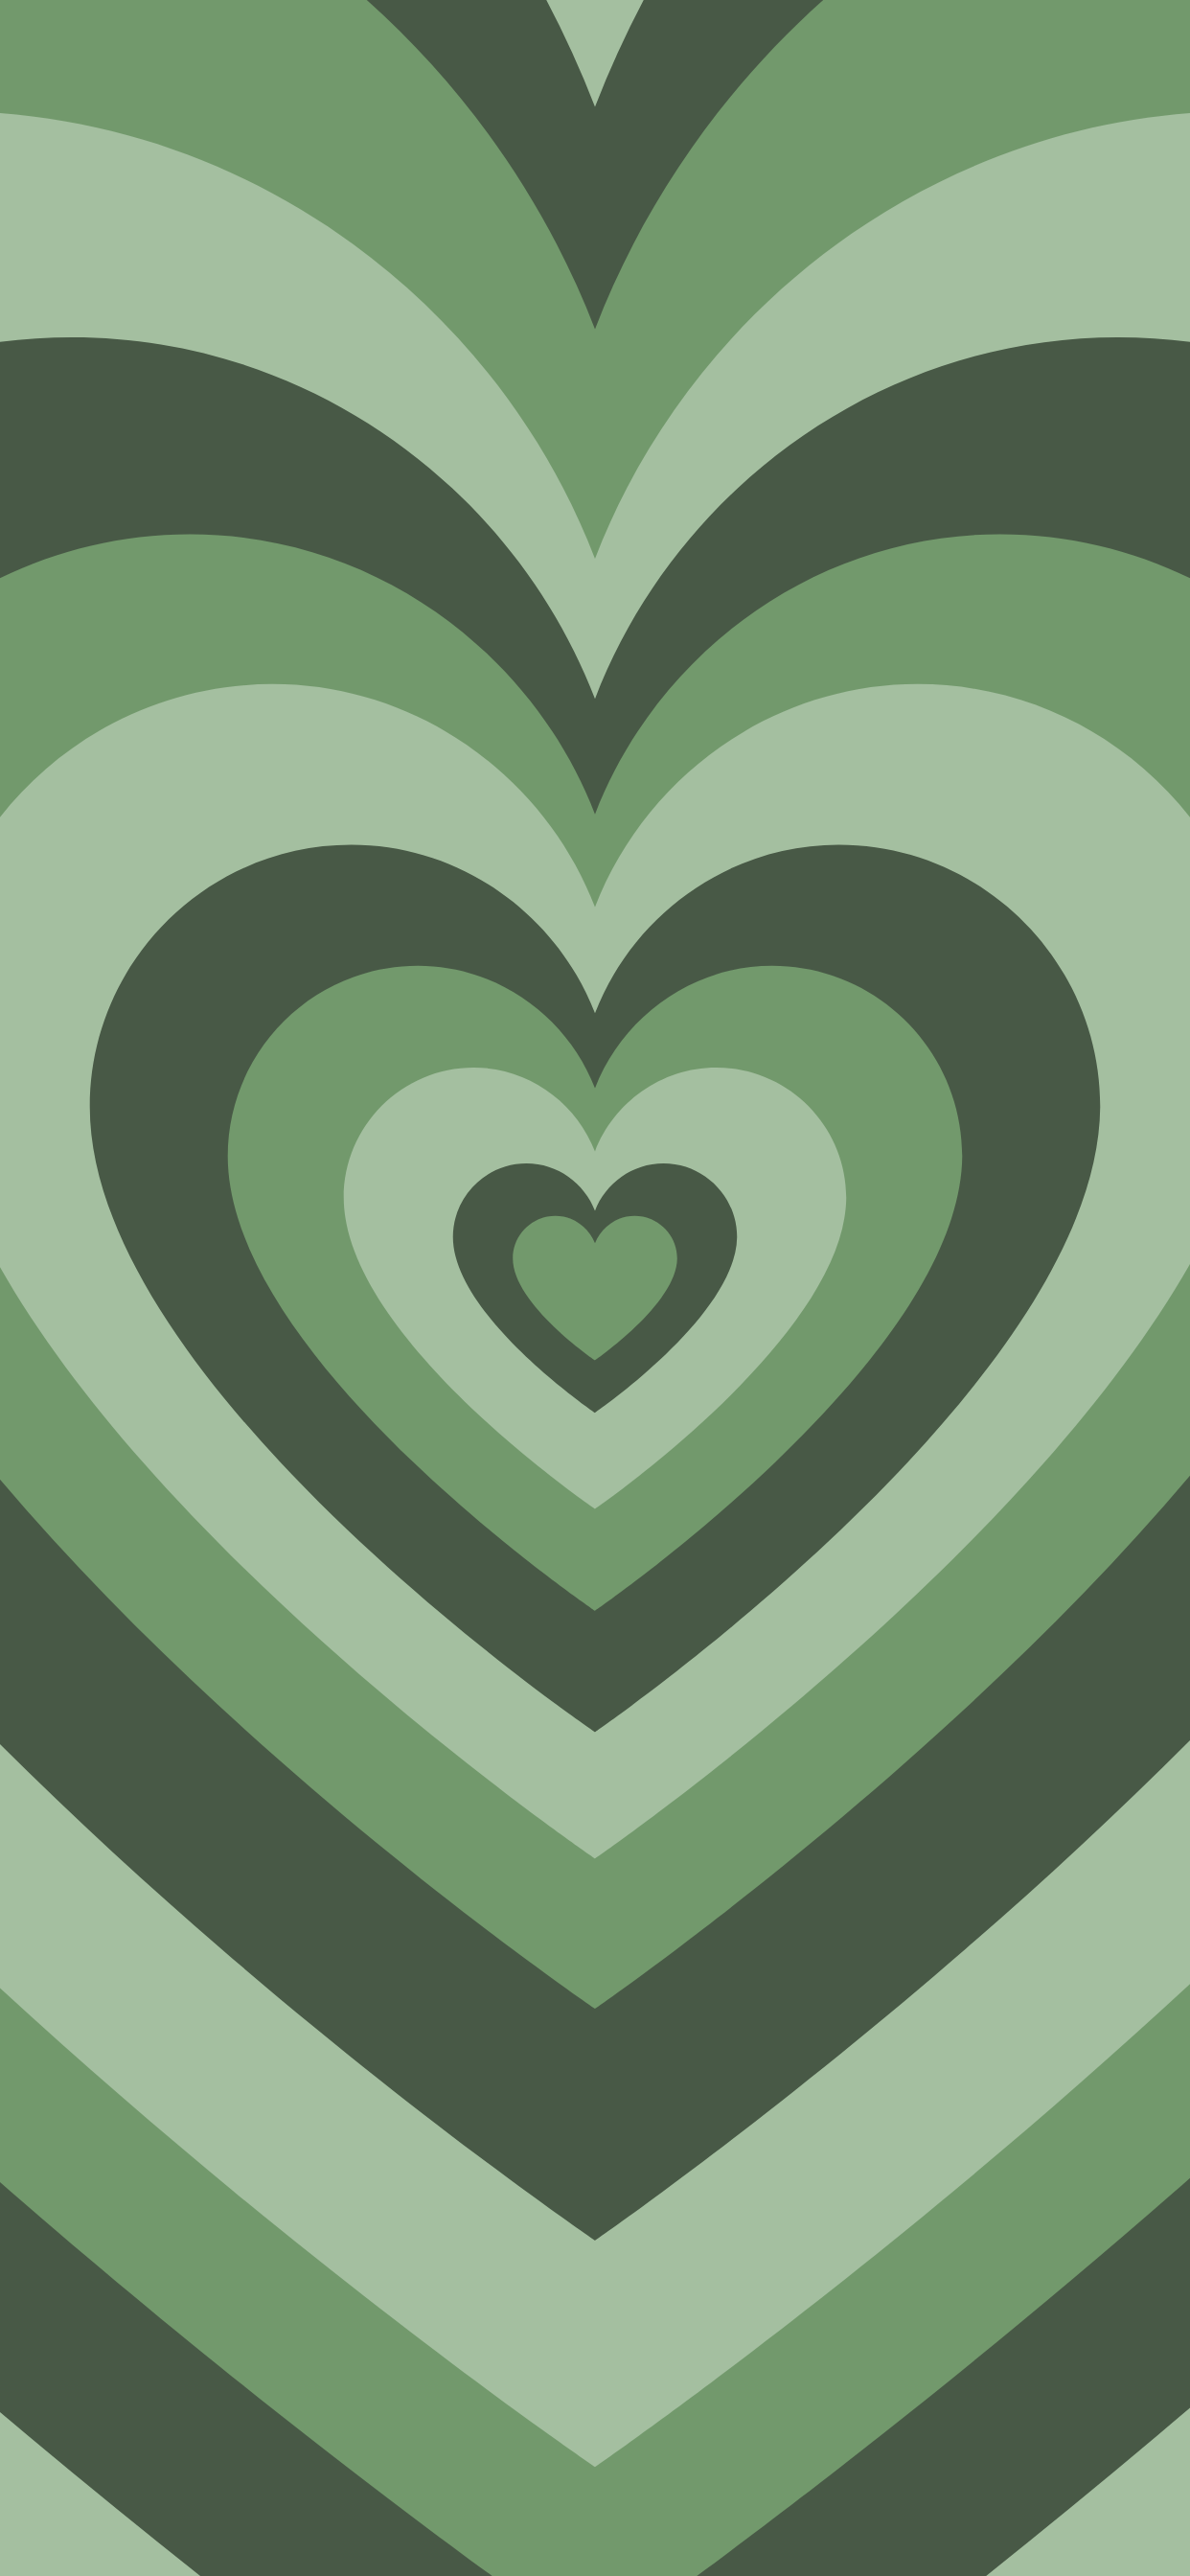 Download Image Mint Green Hearts Setting the Scene for a Magical Day  Wallpaper  Wallpaperscom